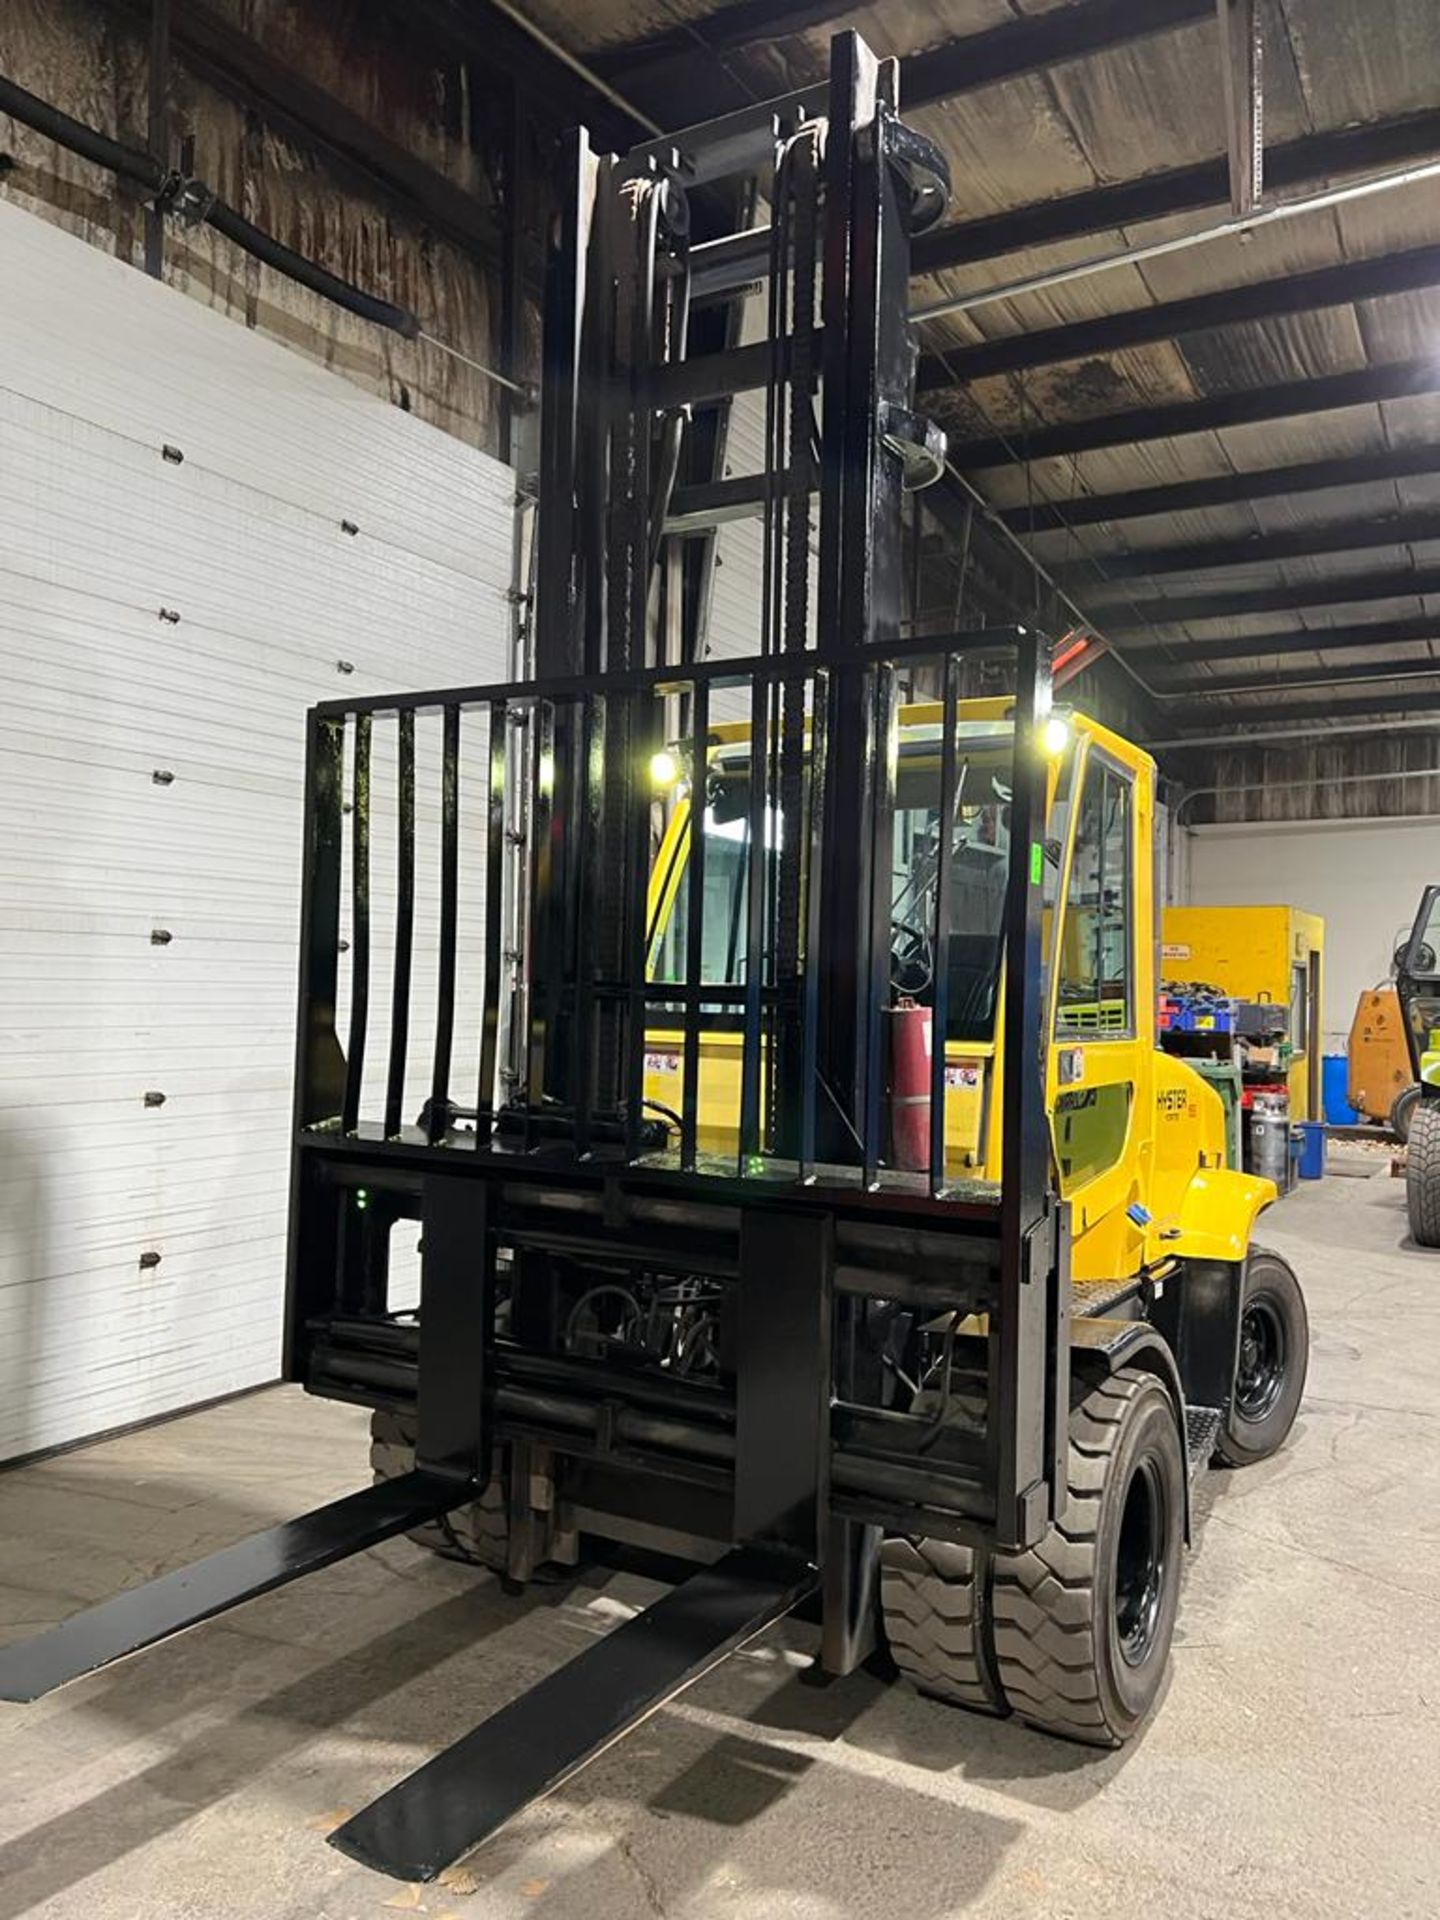 NICE 2017 Hyster model 155 - 15,500lbs Capacity OUTDOOR Forklift Diesel with CAB sideshift - Image 3 of 6